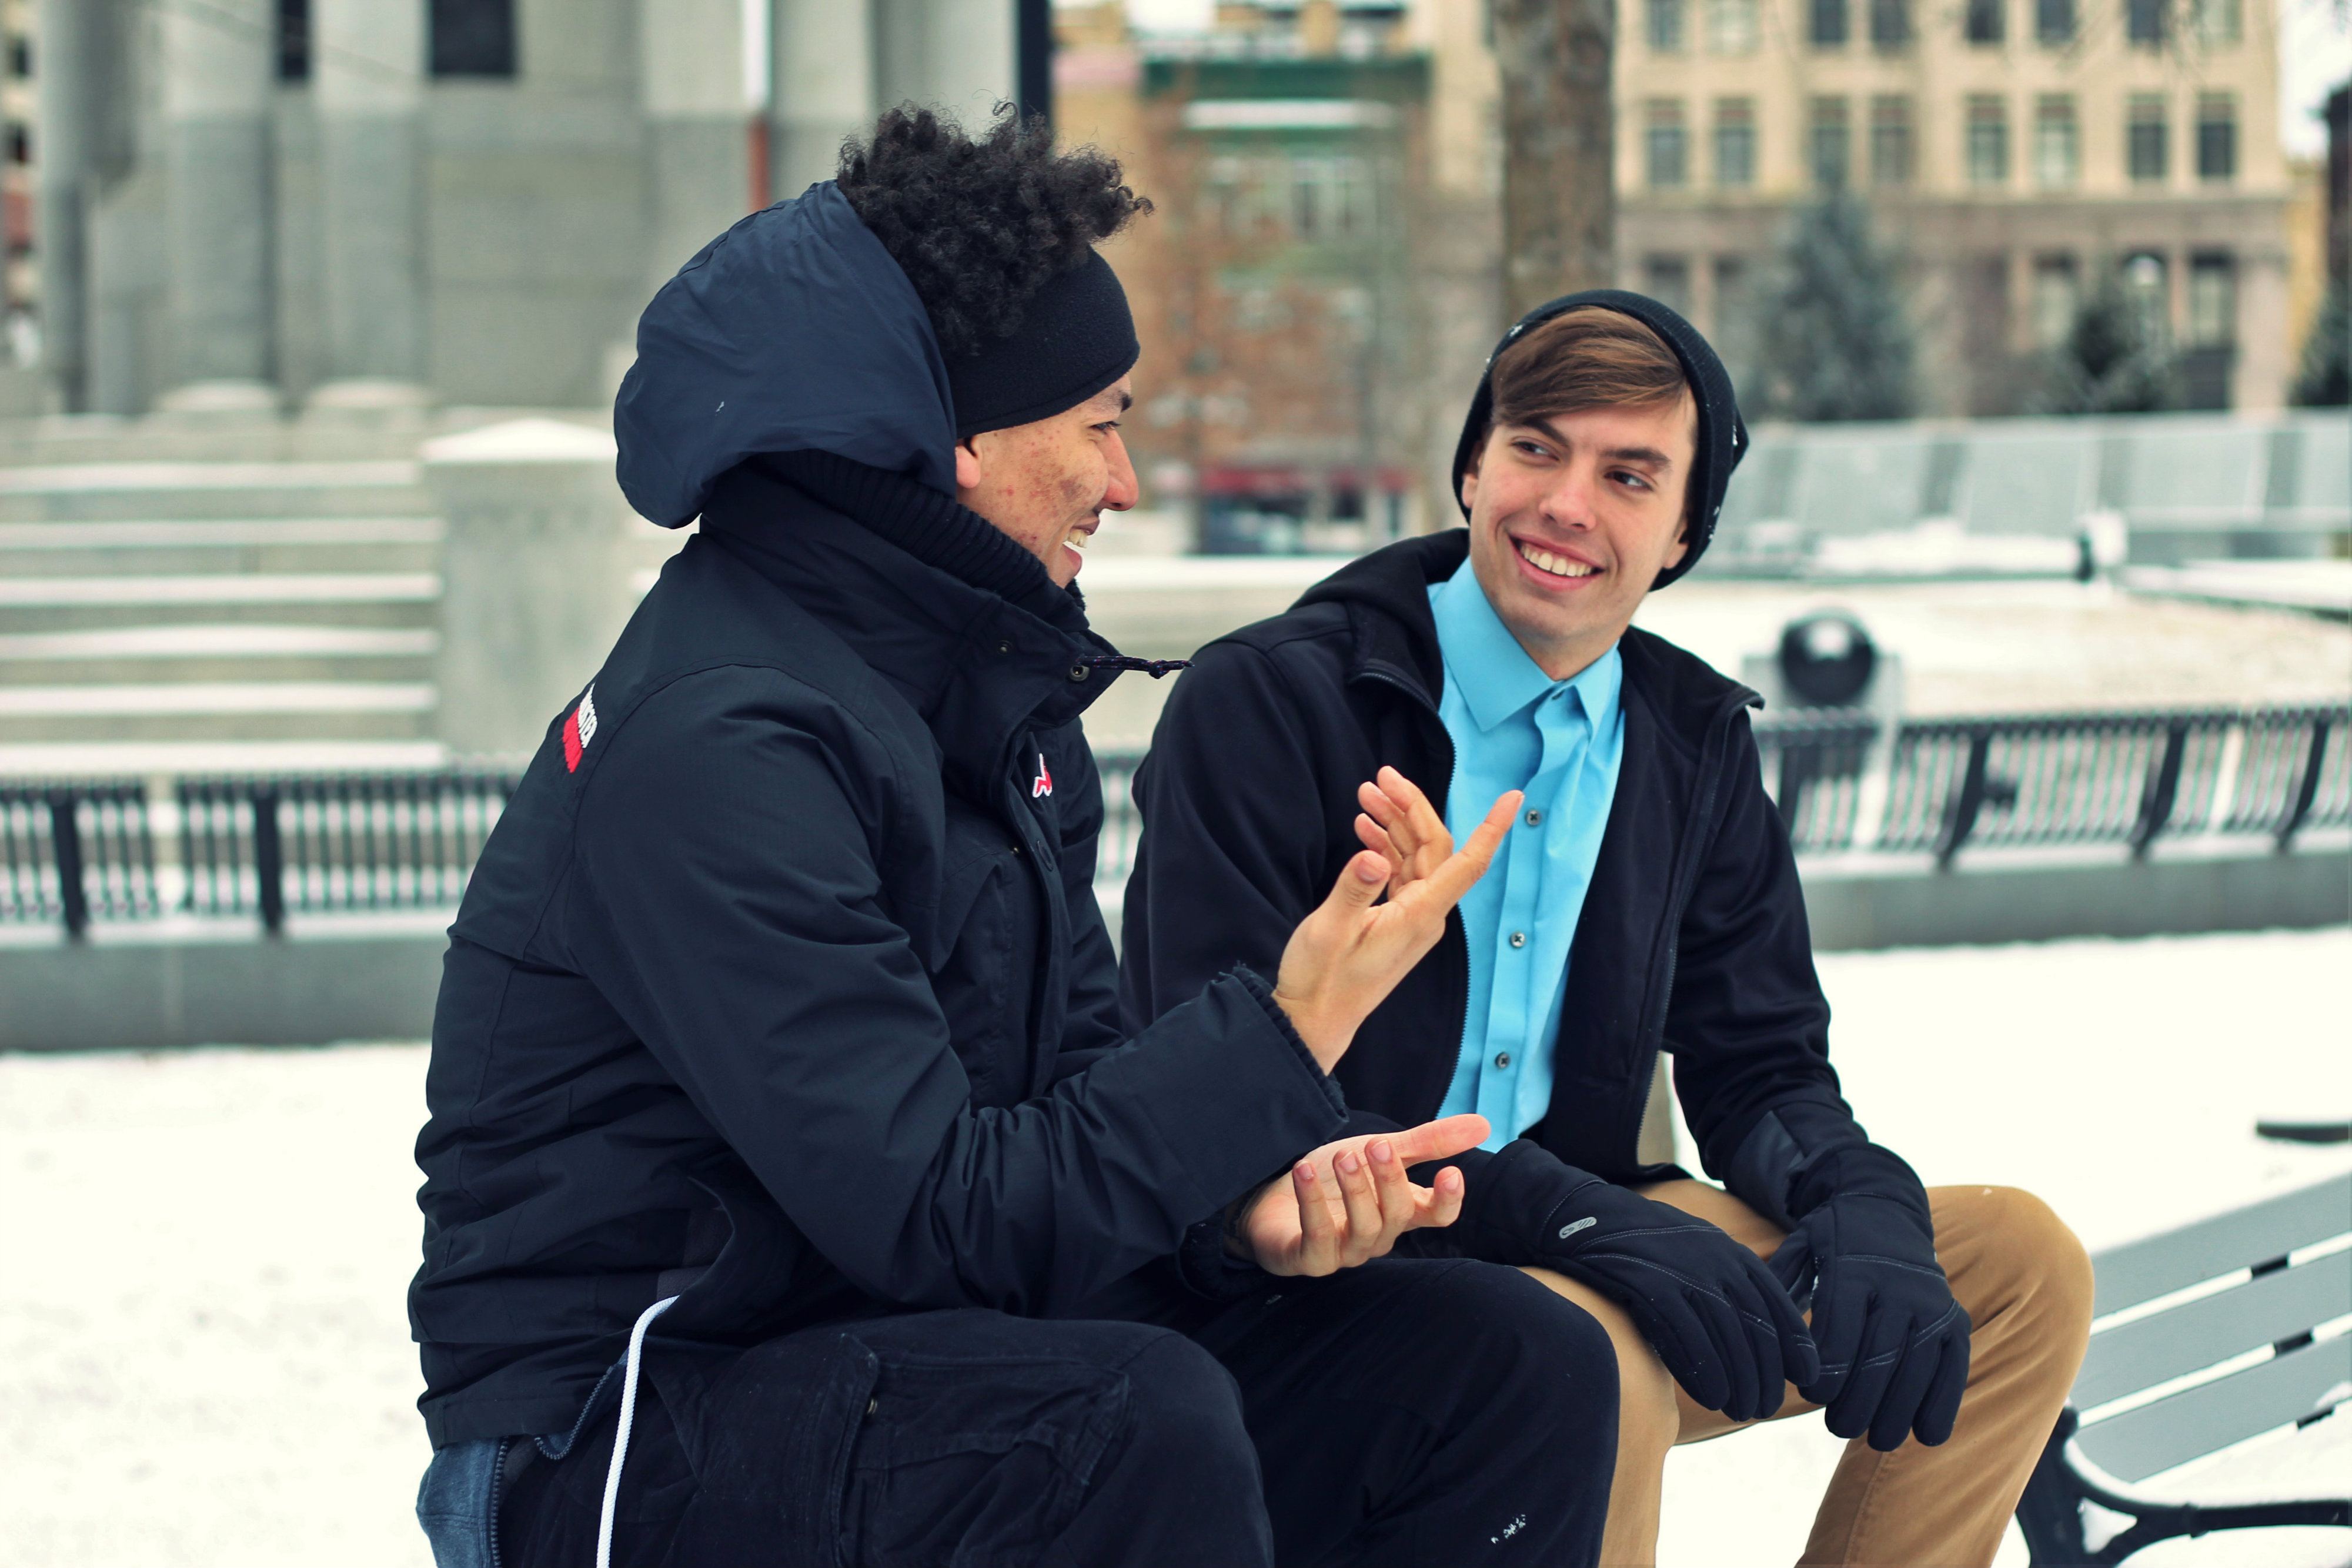 How to Start Talking to Strangers with Ease Even If You’re Shy